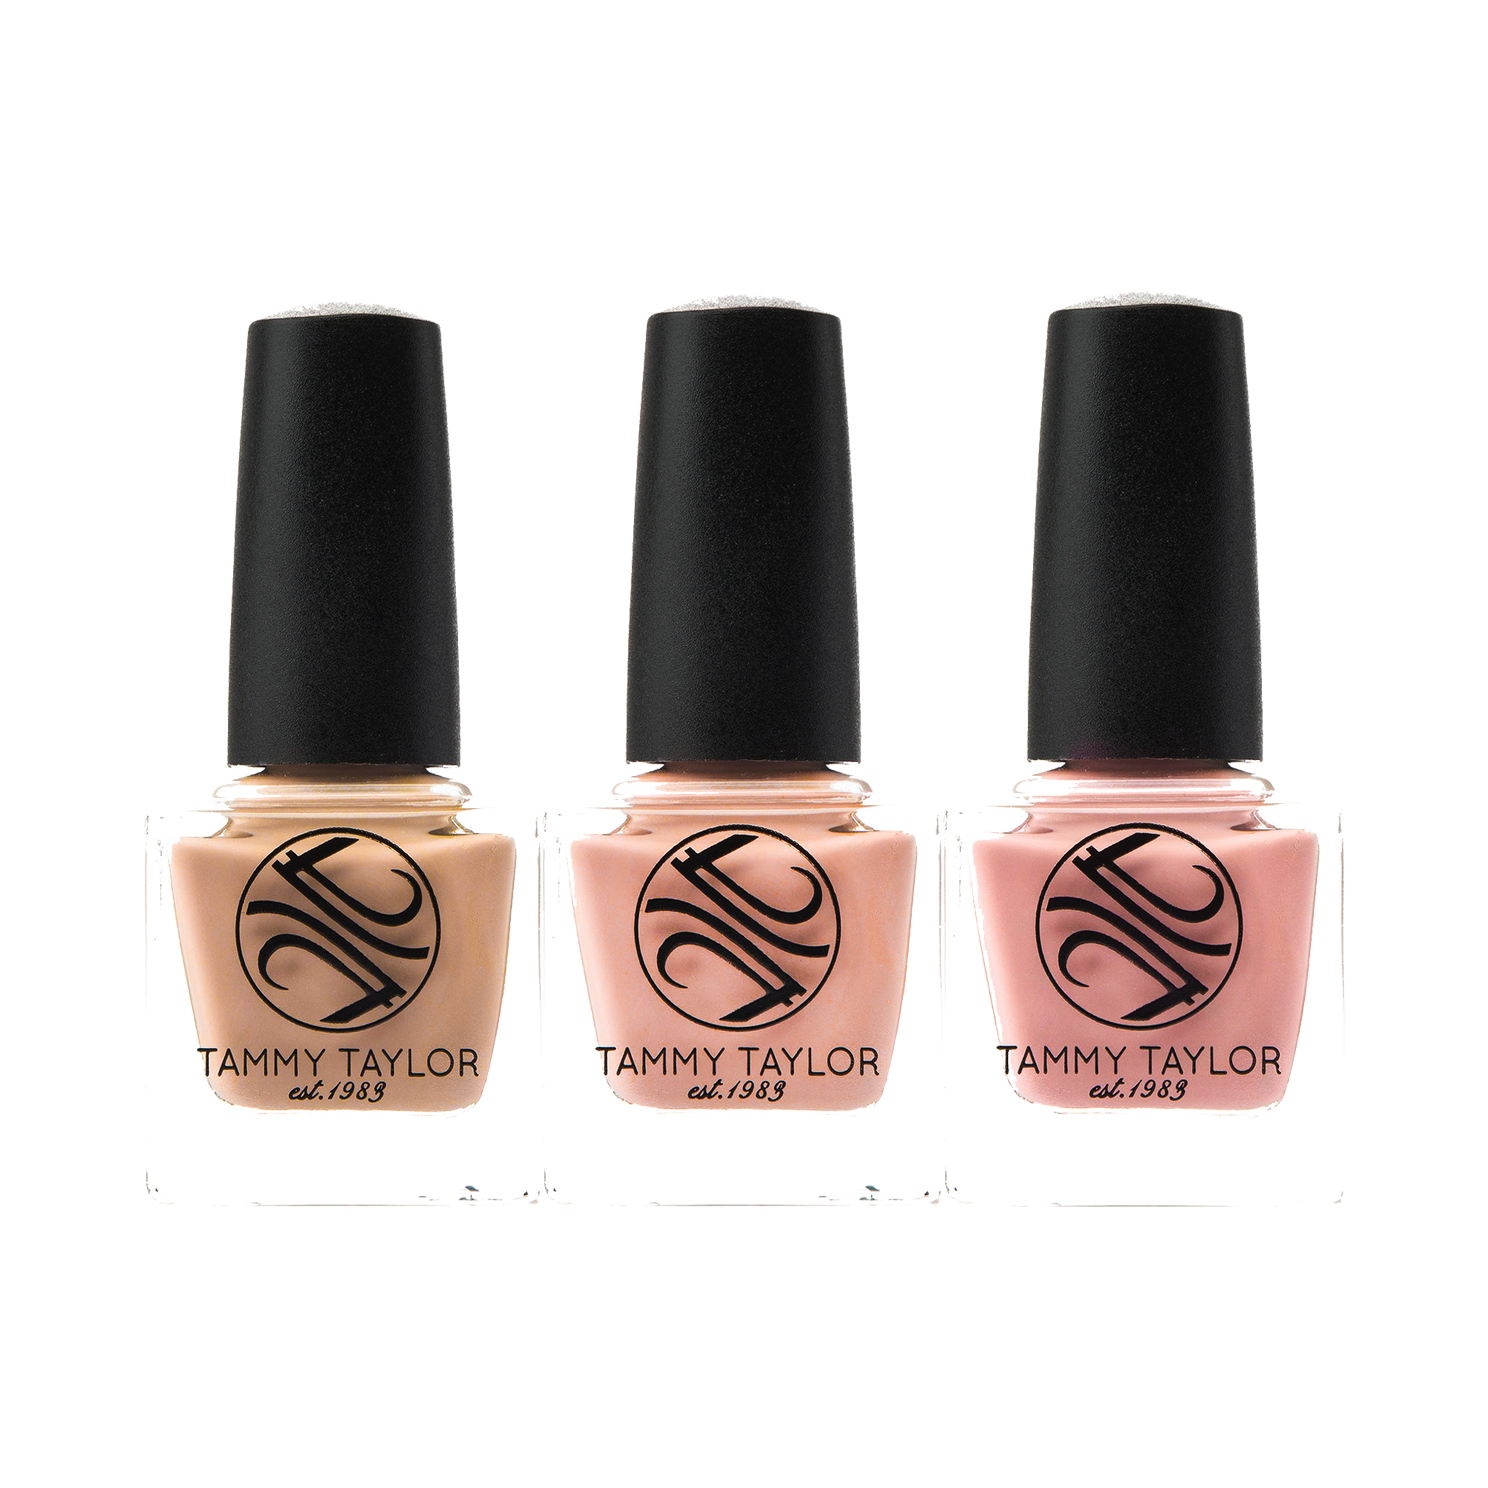 Sheer Nude French Entire Collection Bundle